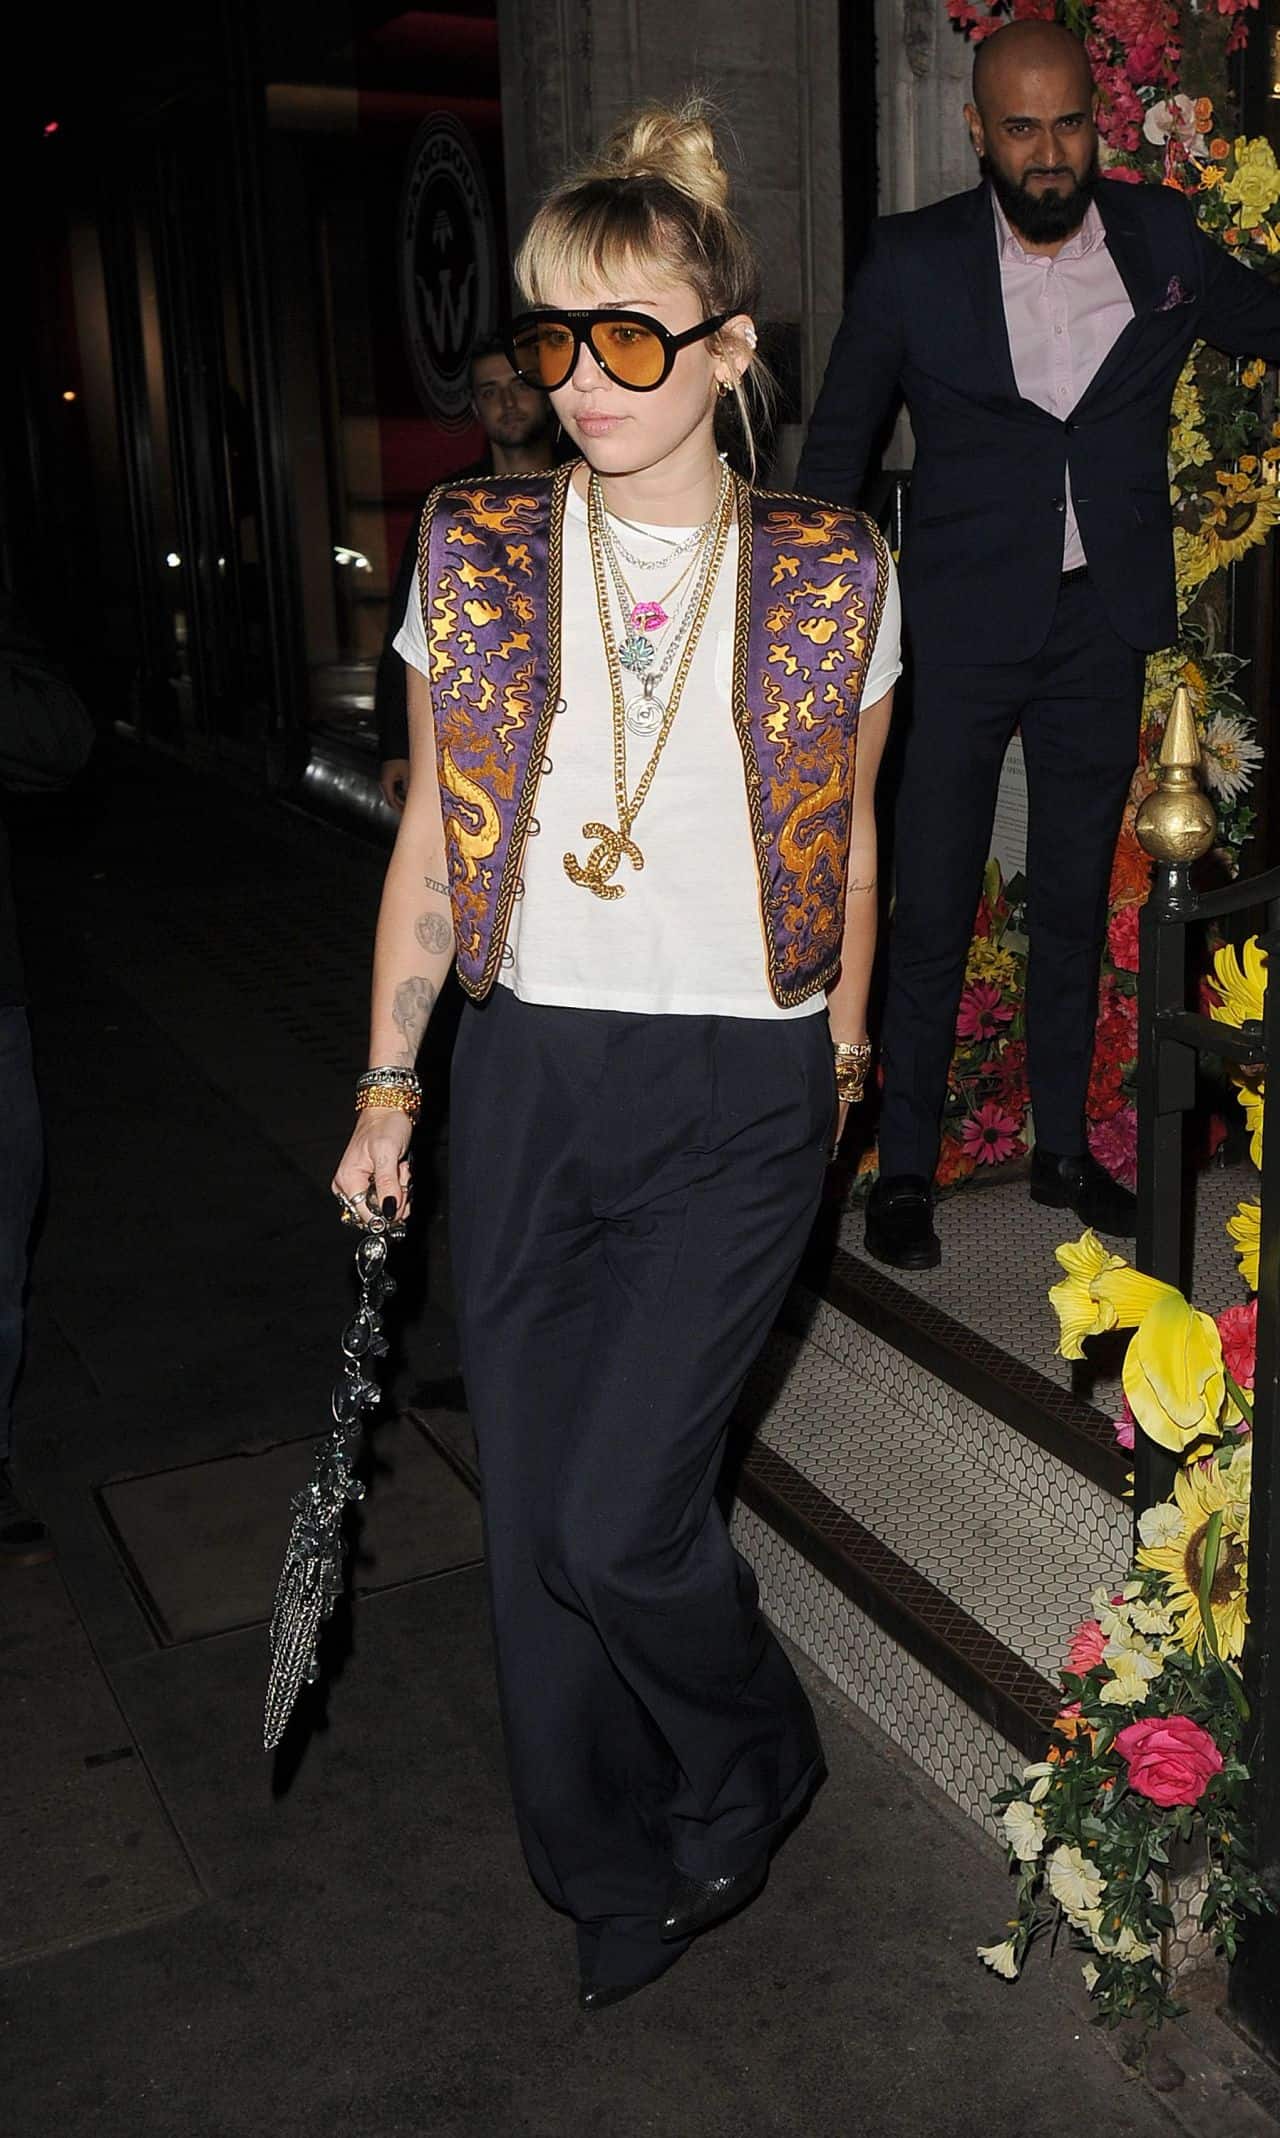 Miley Cyrus Shows Off Her Unique Chic Style in London